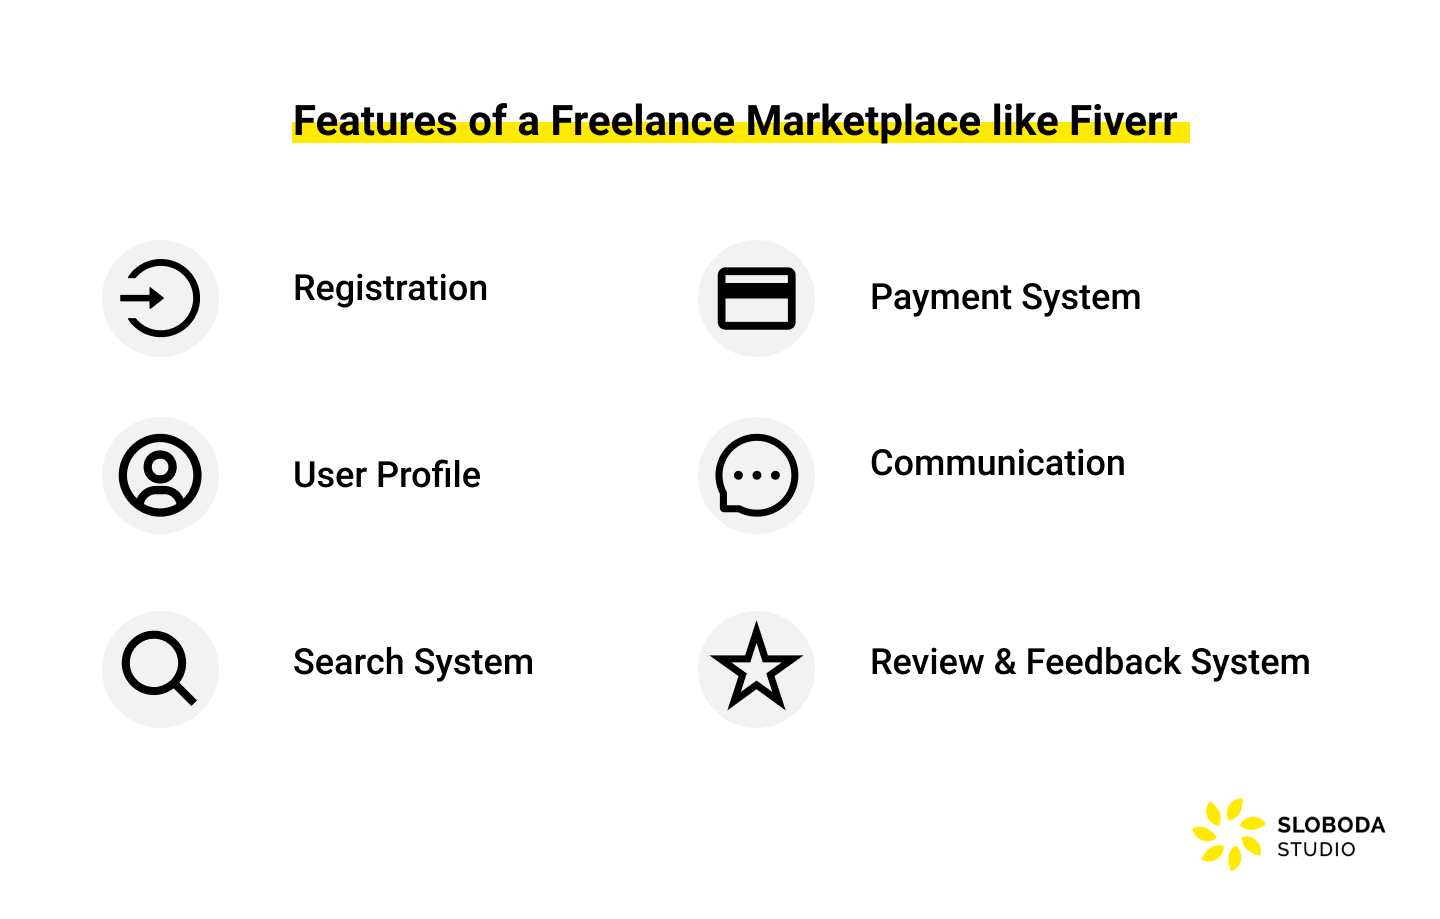 Features of a Freelance Marketplace Like Fiverr